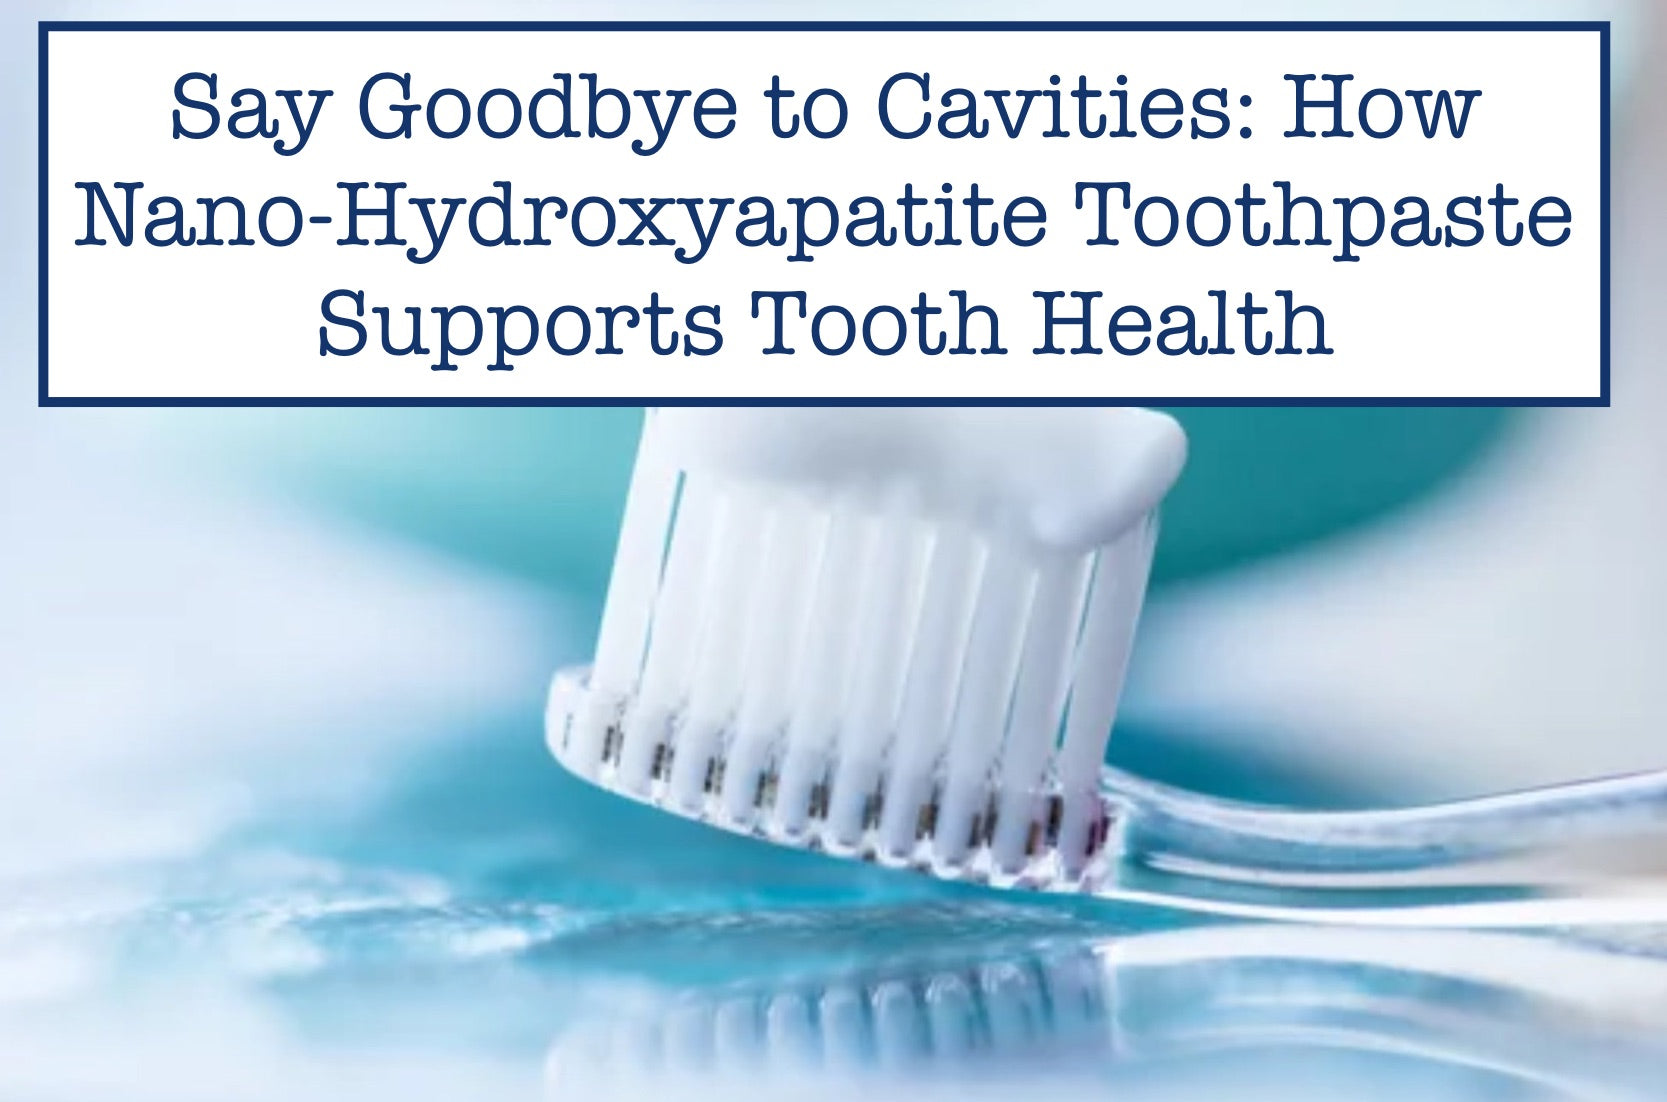 Say Goodbye to Cavities: How Nano-Hydroxyapatite Toothpaste Supports Tooth Health